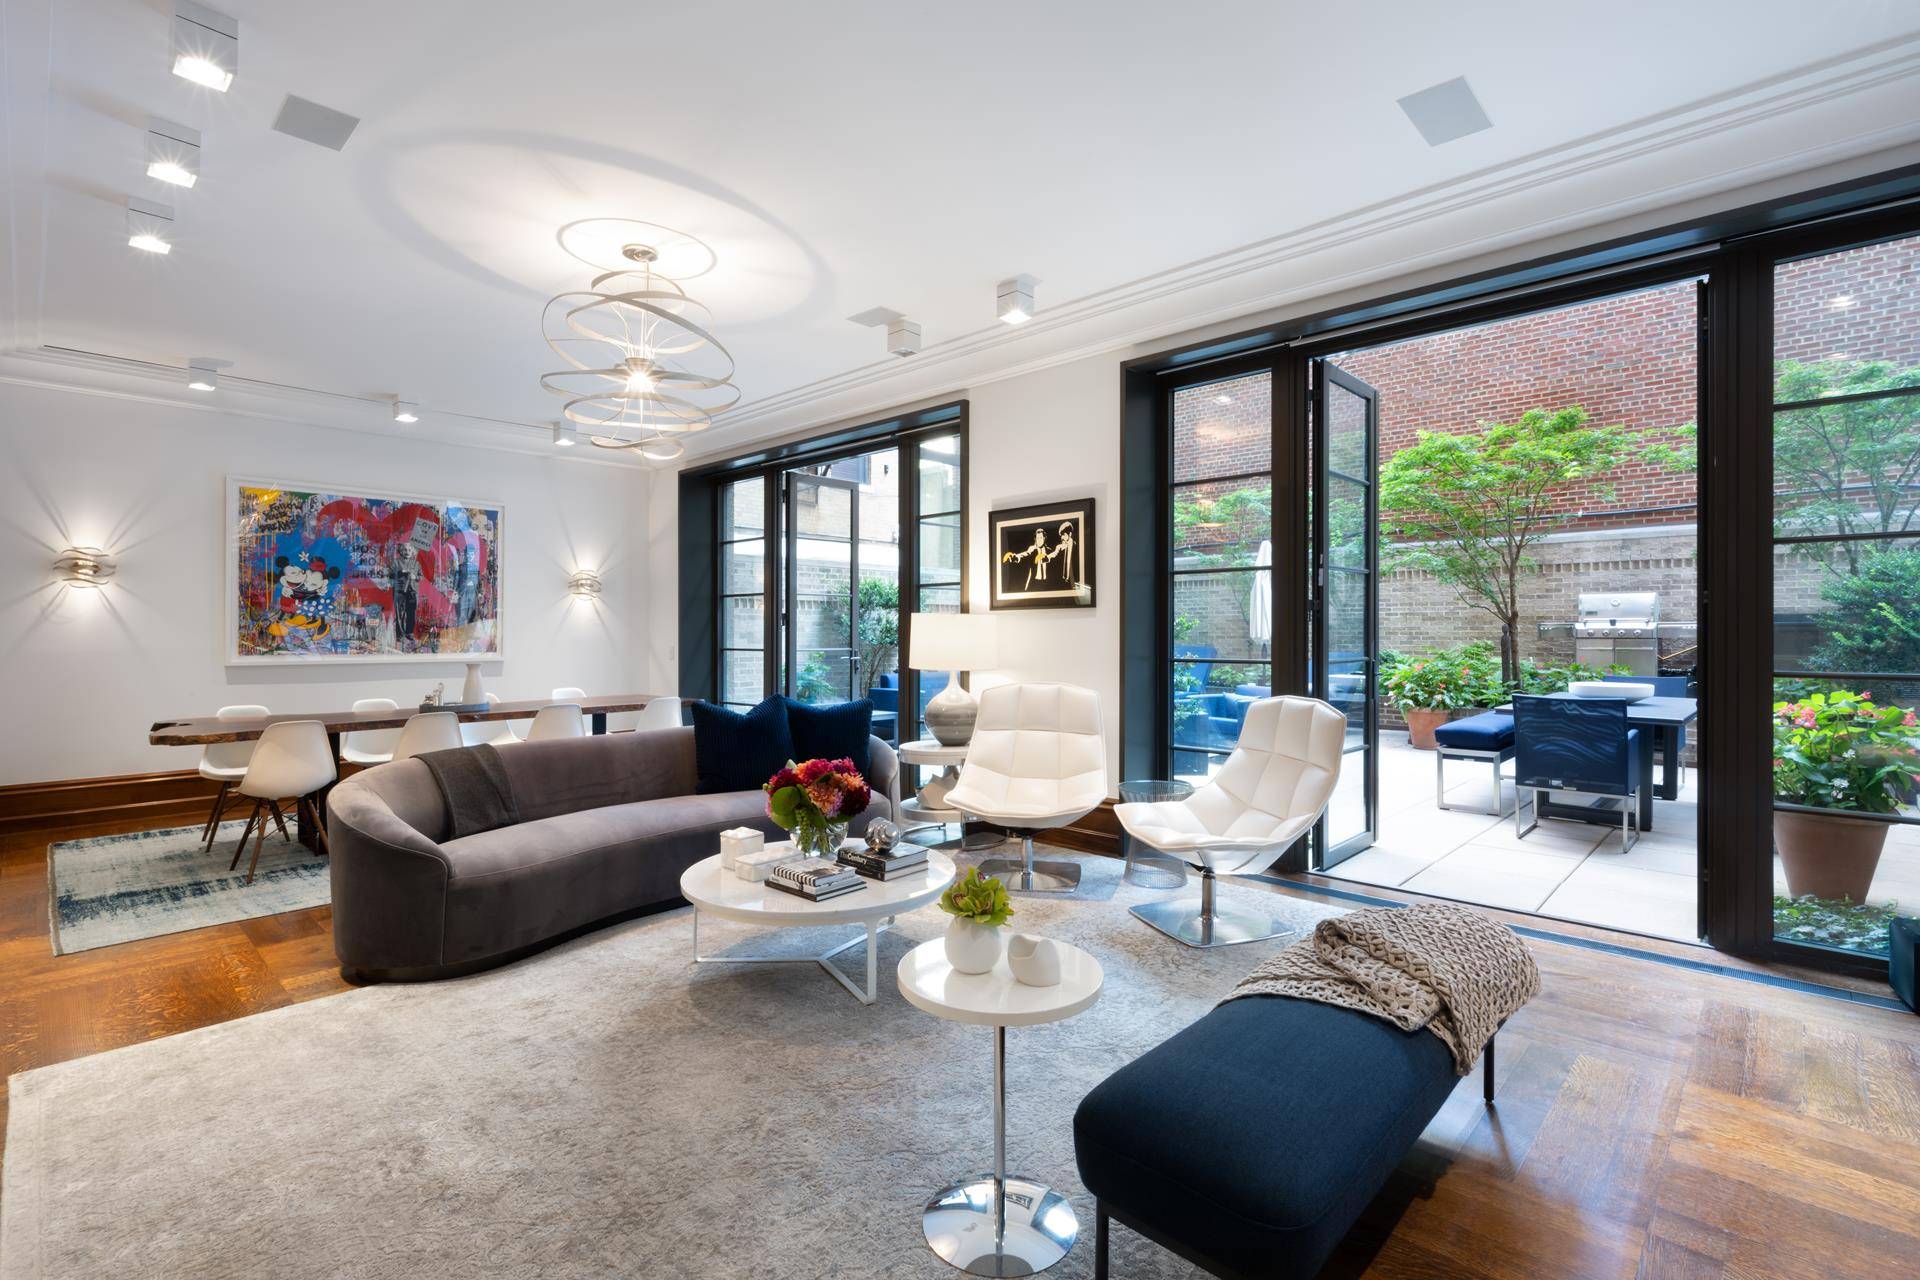 Enjoy five star living at one of the Upper East Side's most coveted addresses.